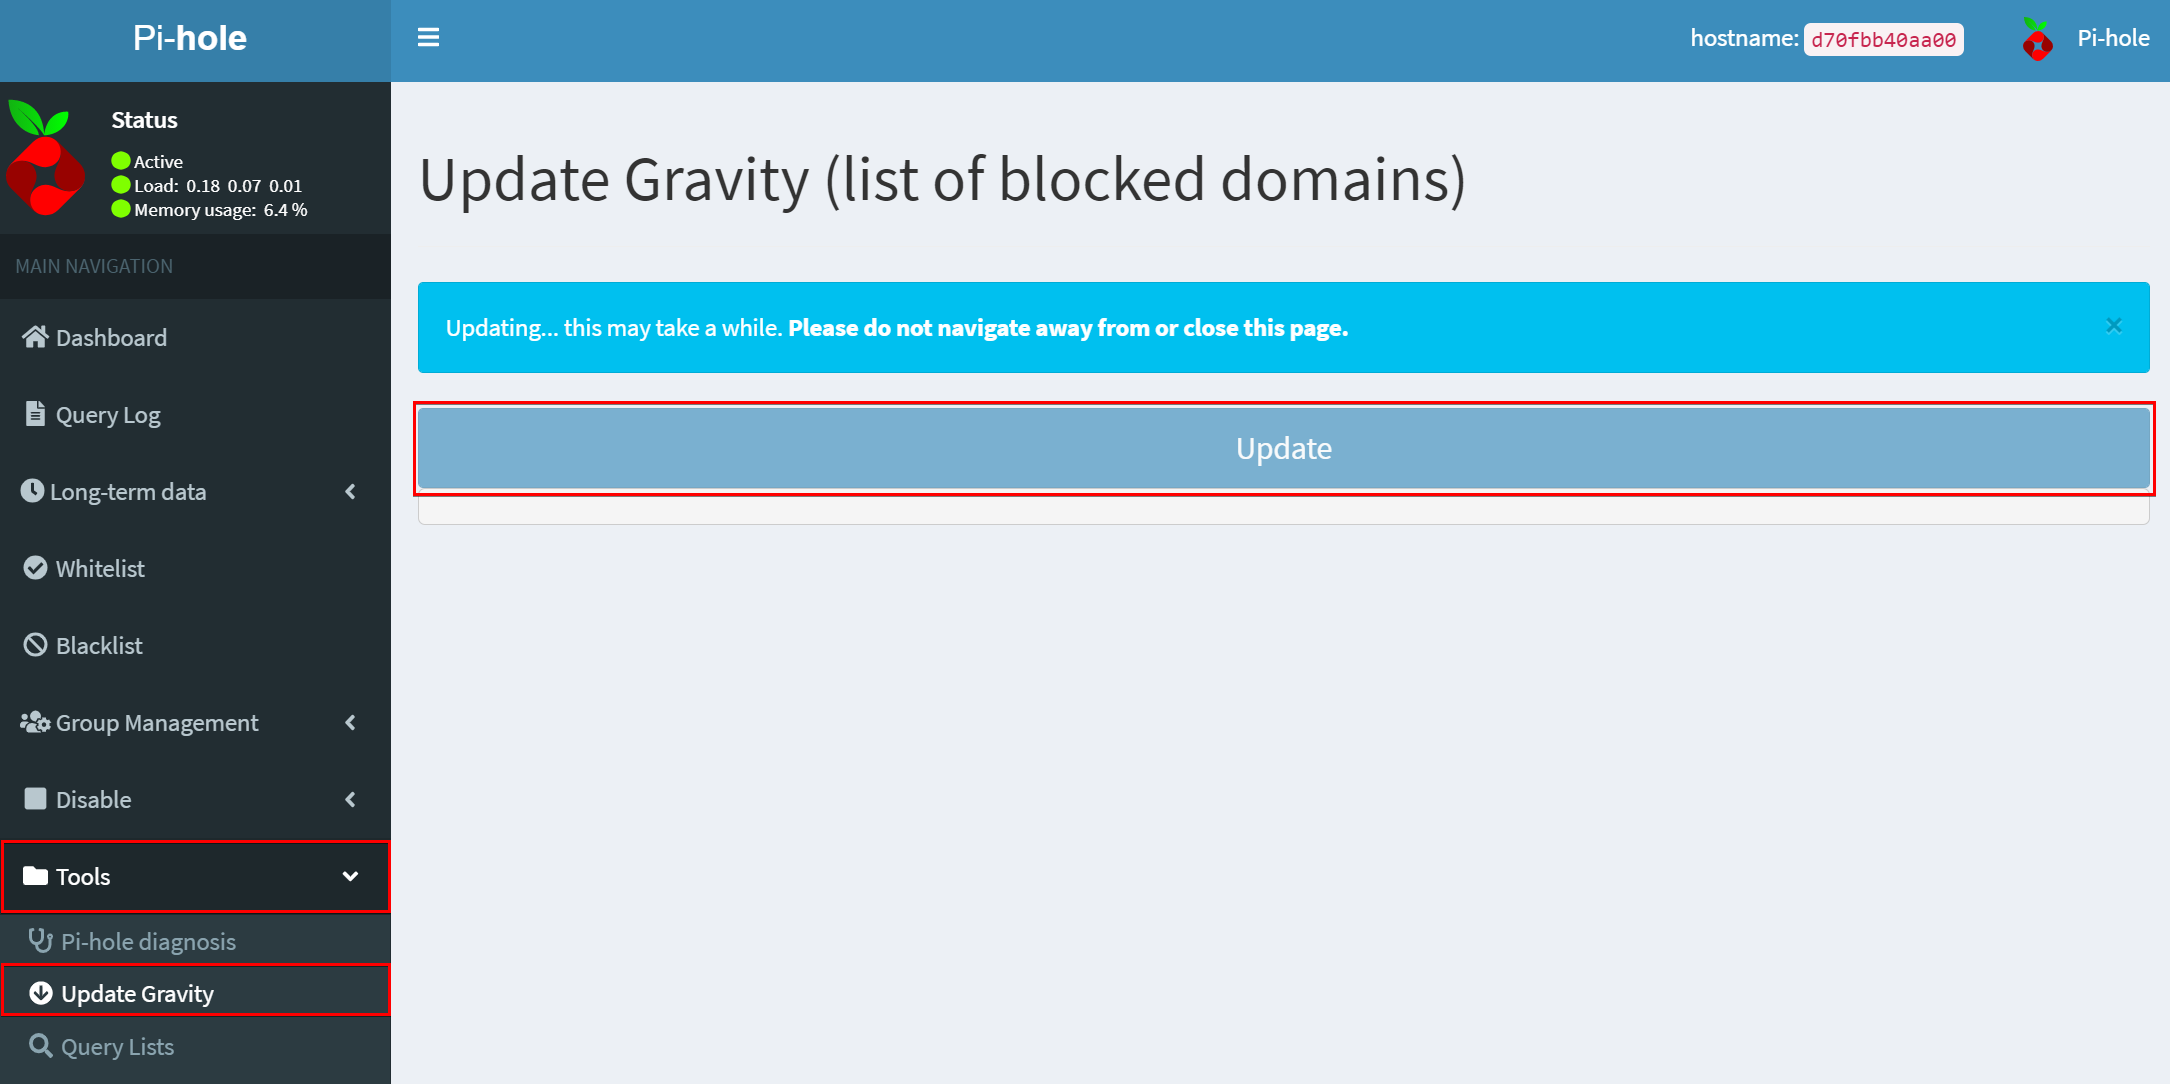 Showing Update Gravity on Pi-hole UI after Copying Additional Website Blacklists on Text File